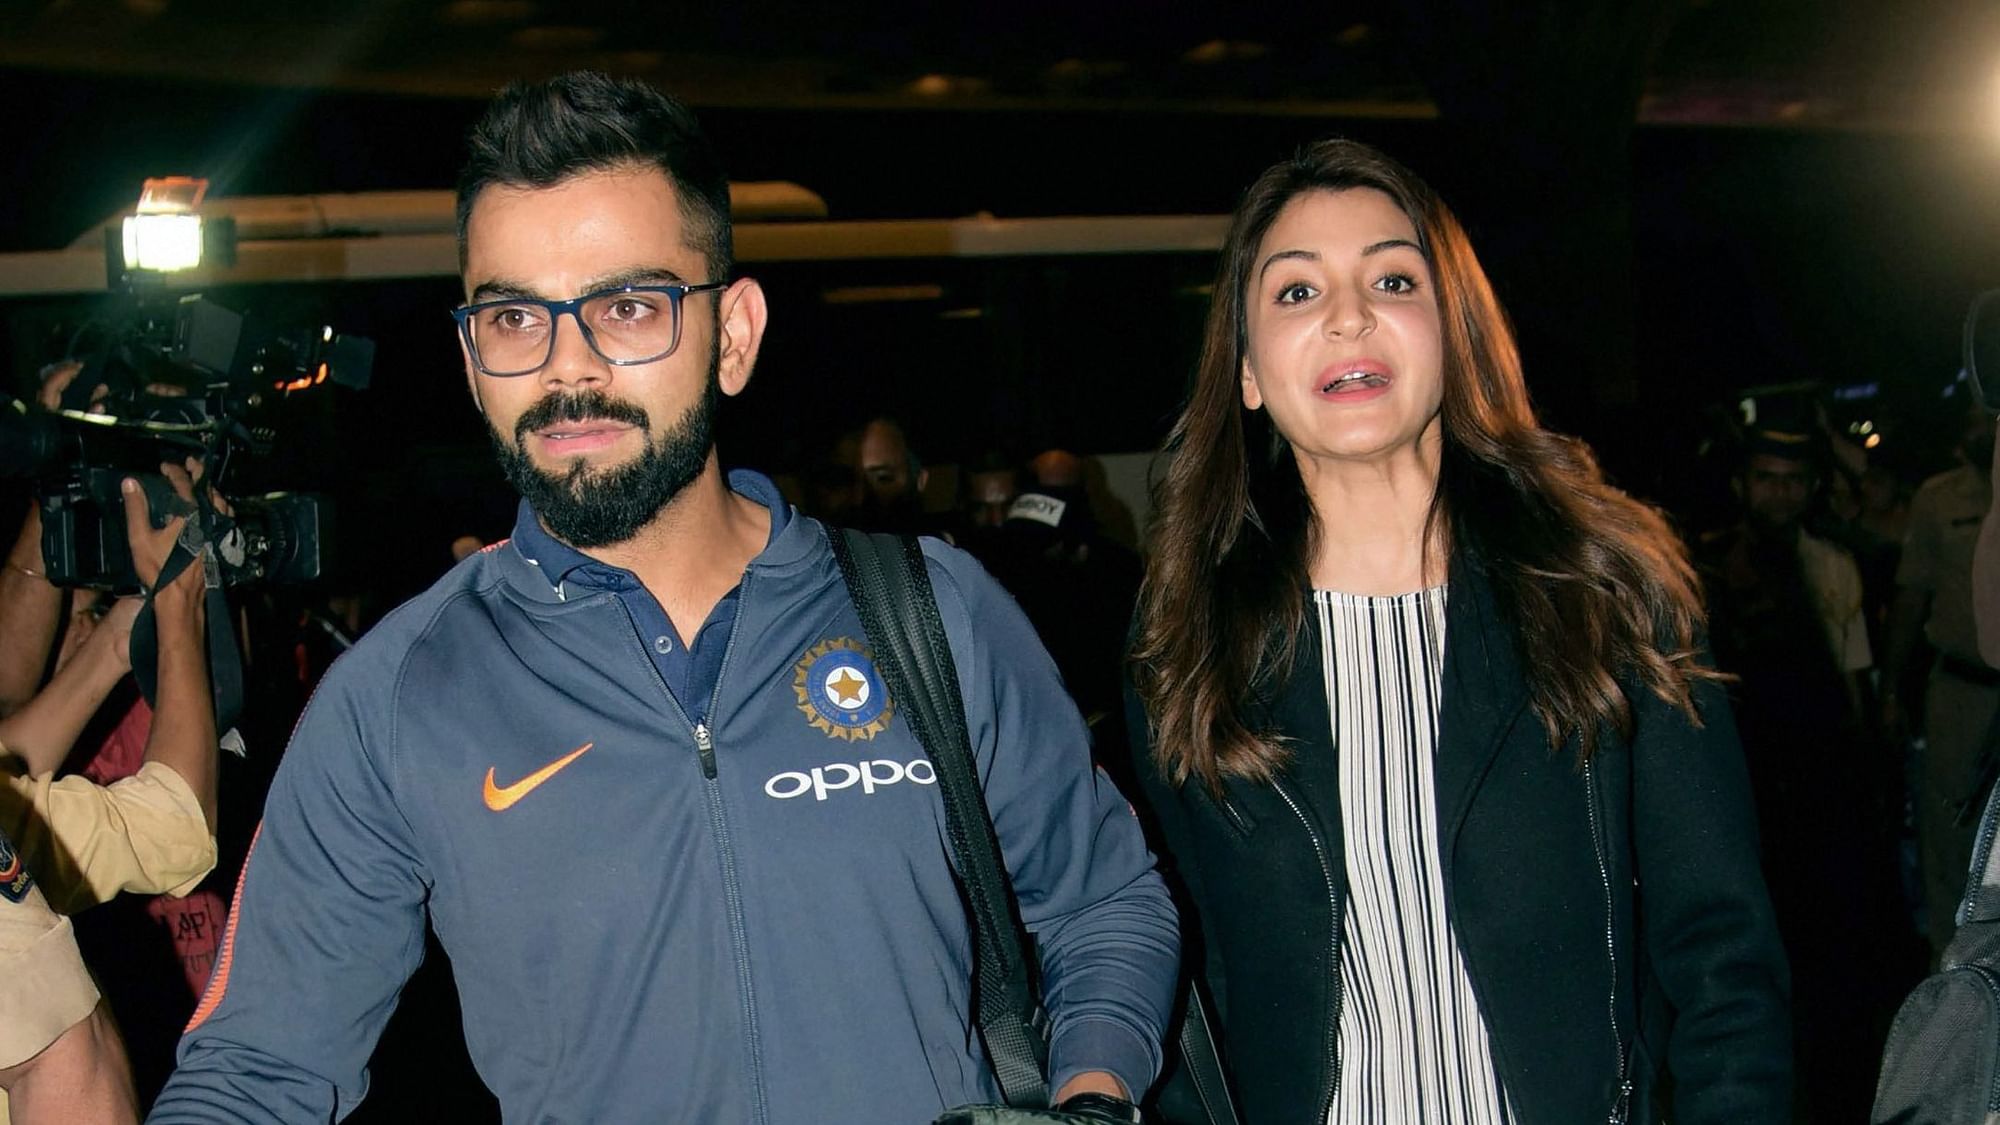 Virat Kohli says he was nervous before meeting Anushka Sharma for the first time on the sets of a TV commercial.